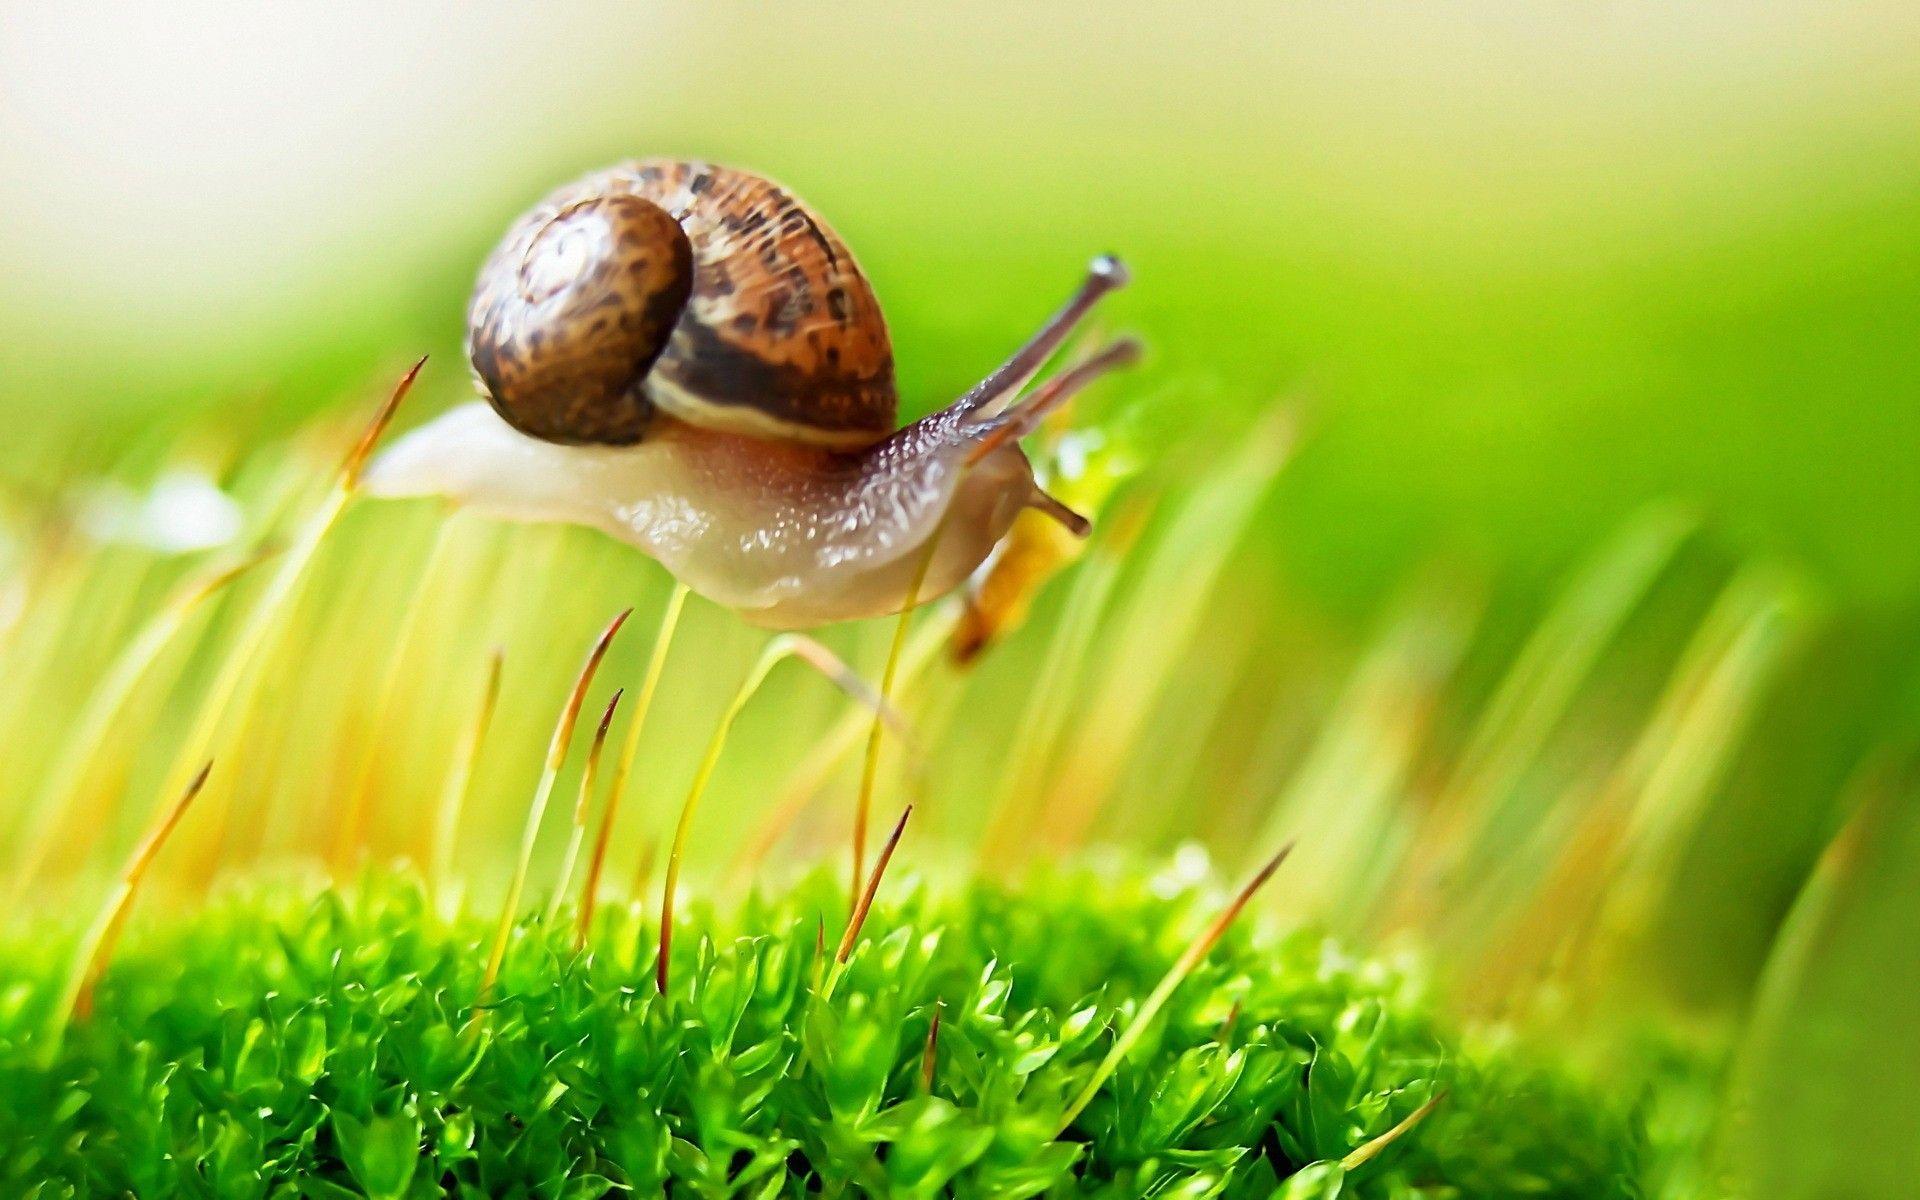 Snail on the grass wallpaper and image, picture, photo